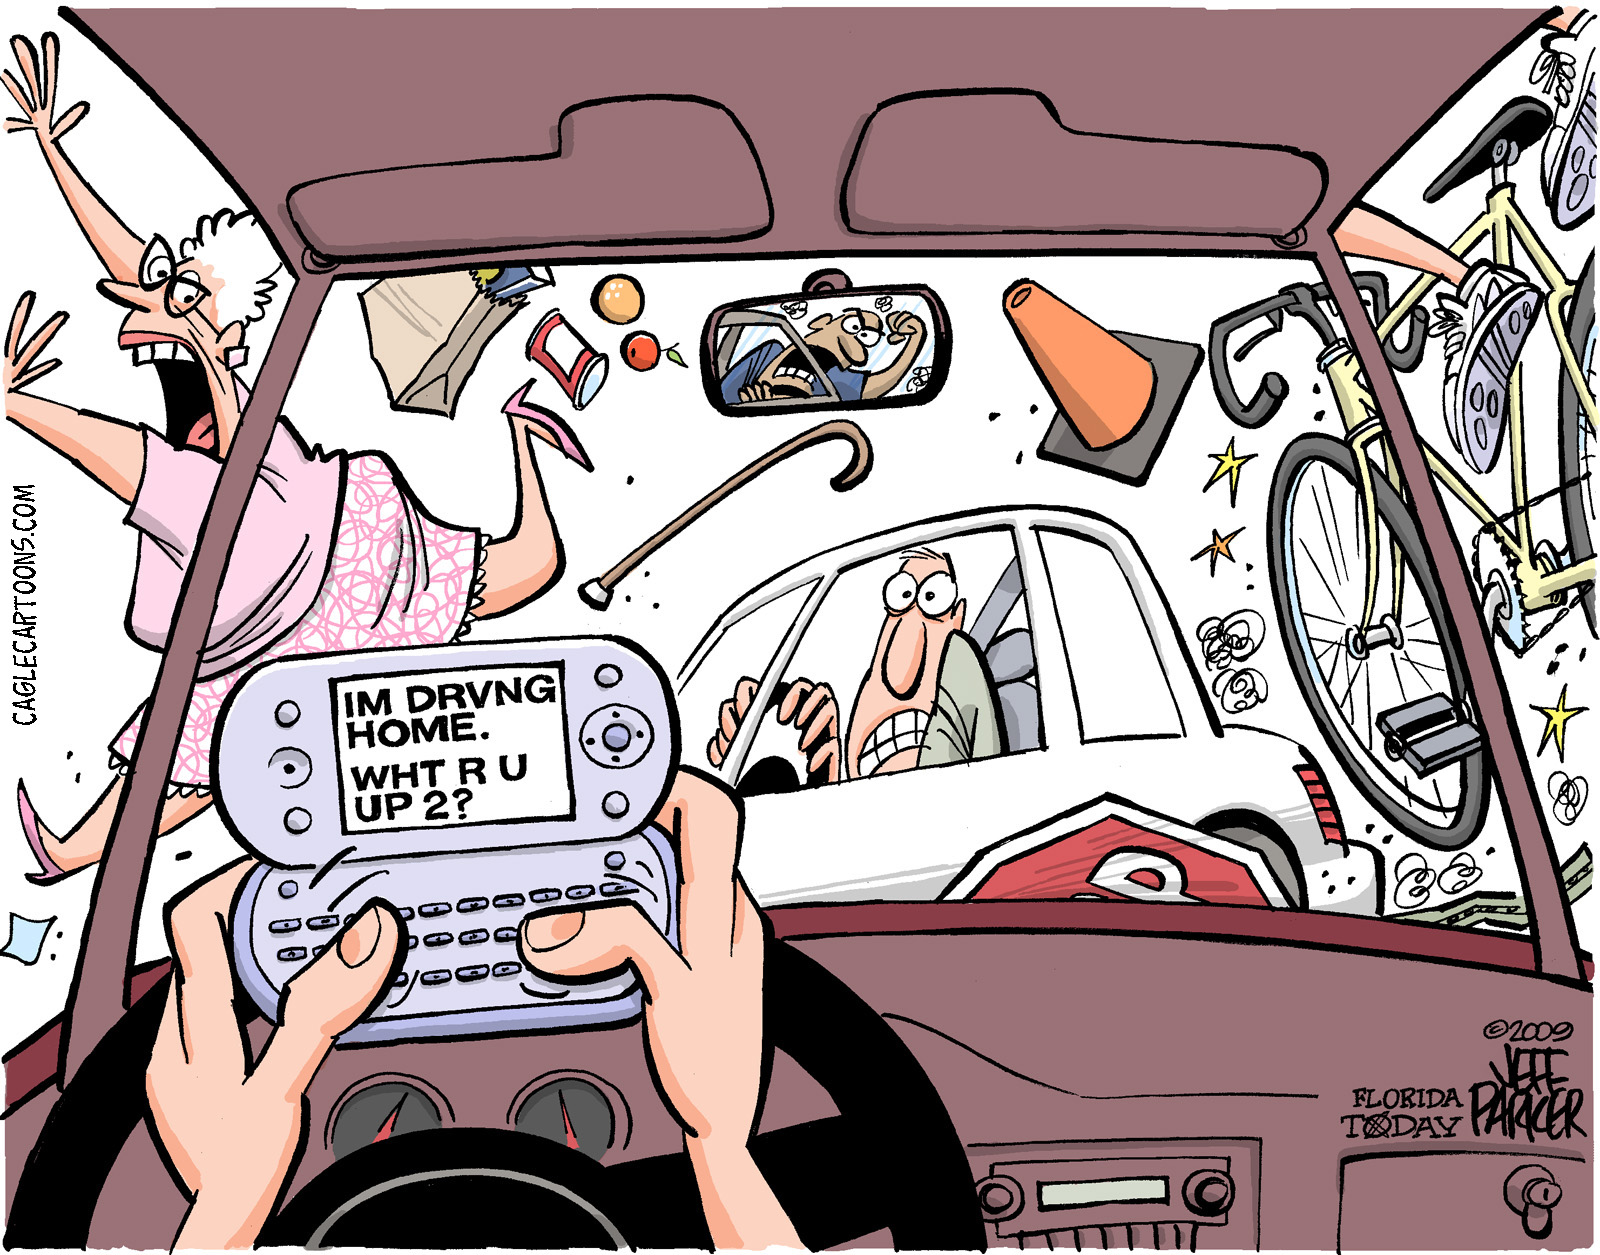 Texting While Driving Featured Opinion